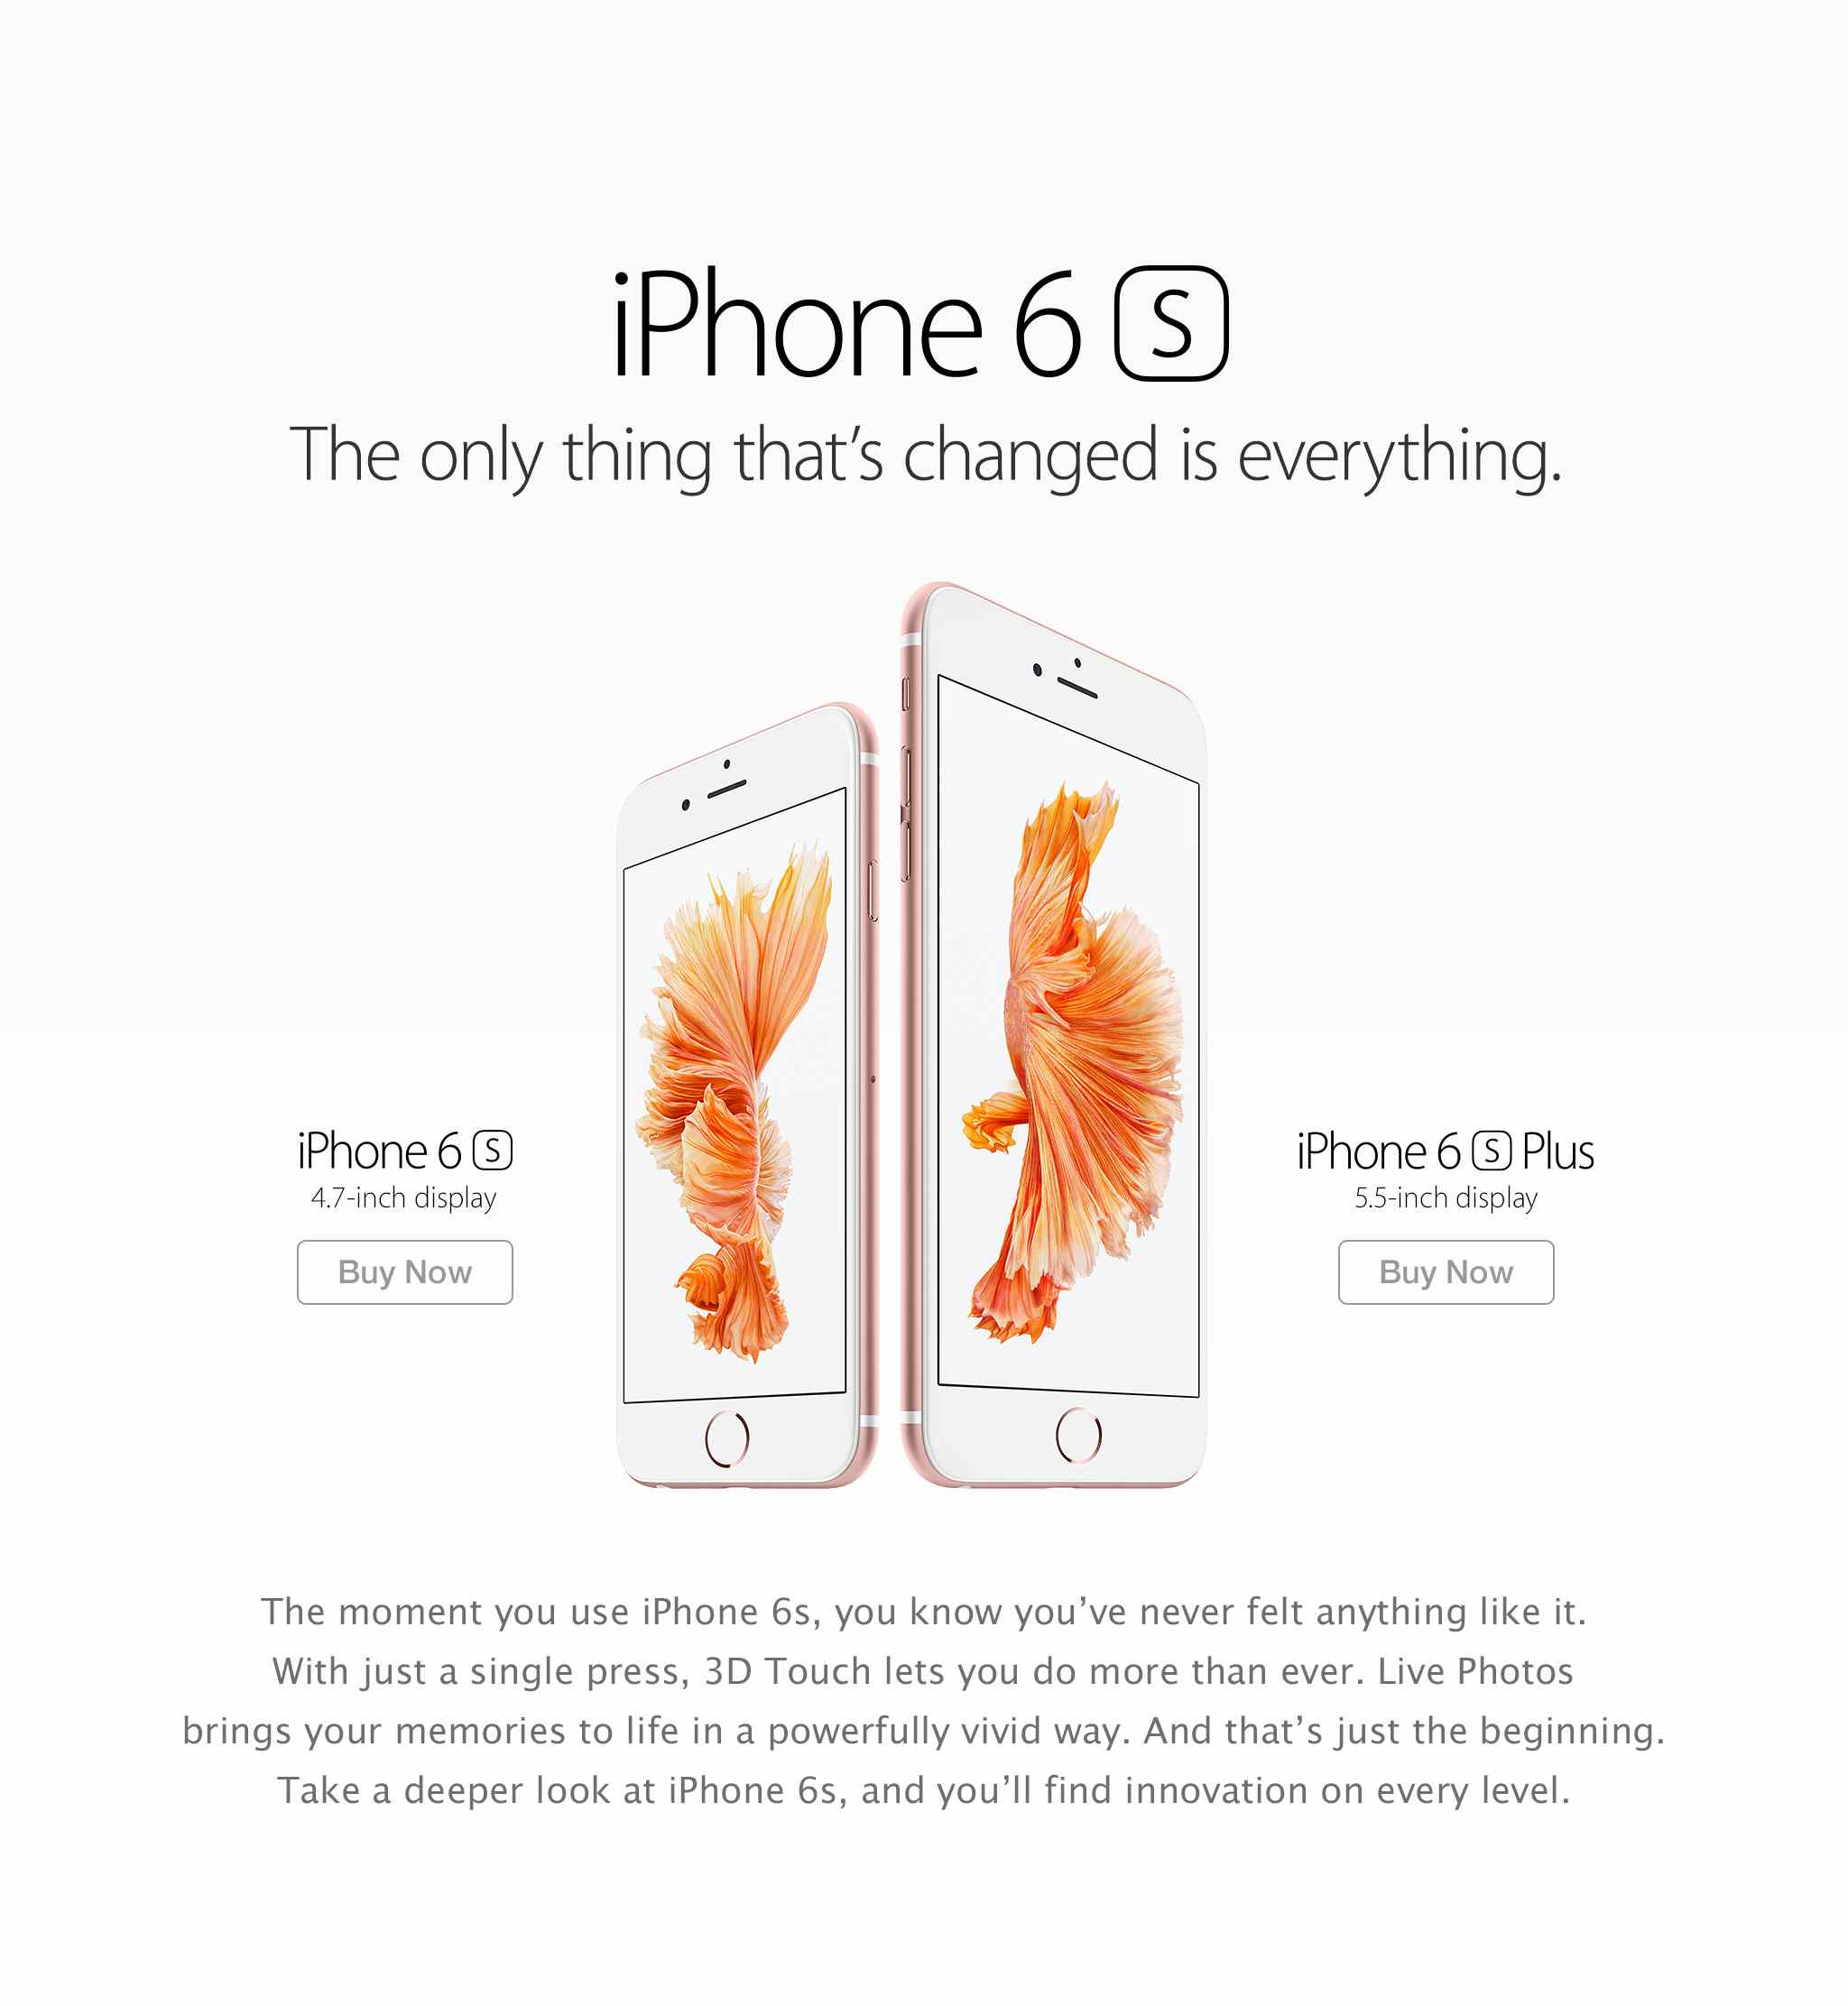 iphone6s learn more